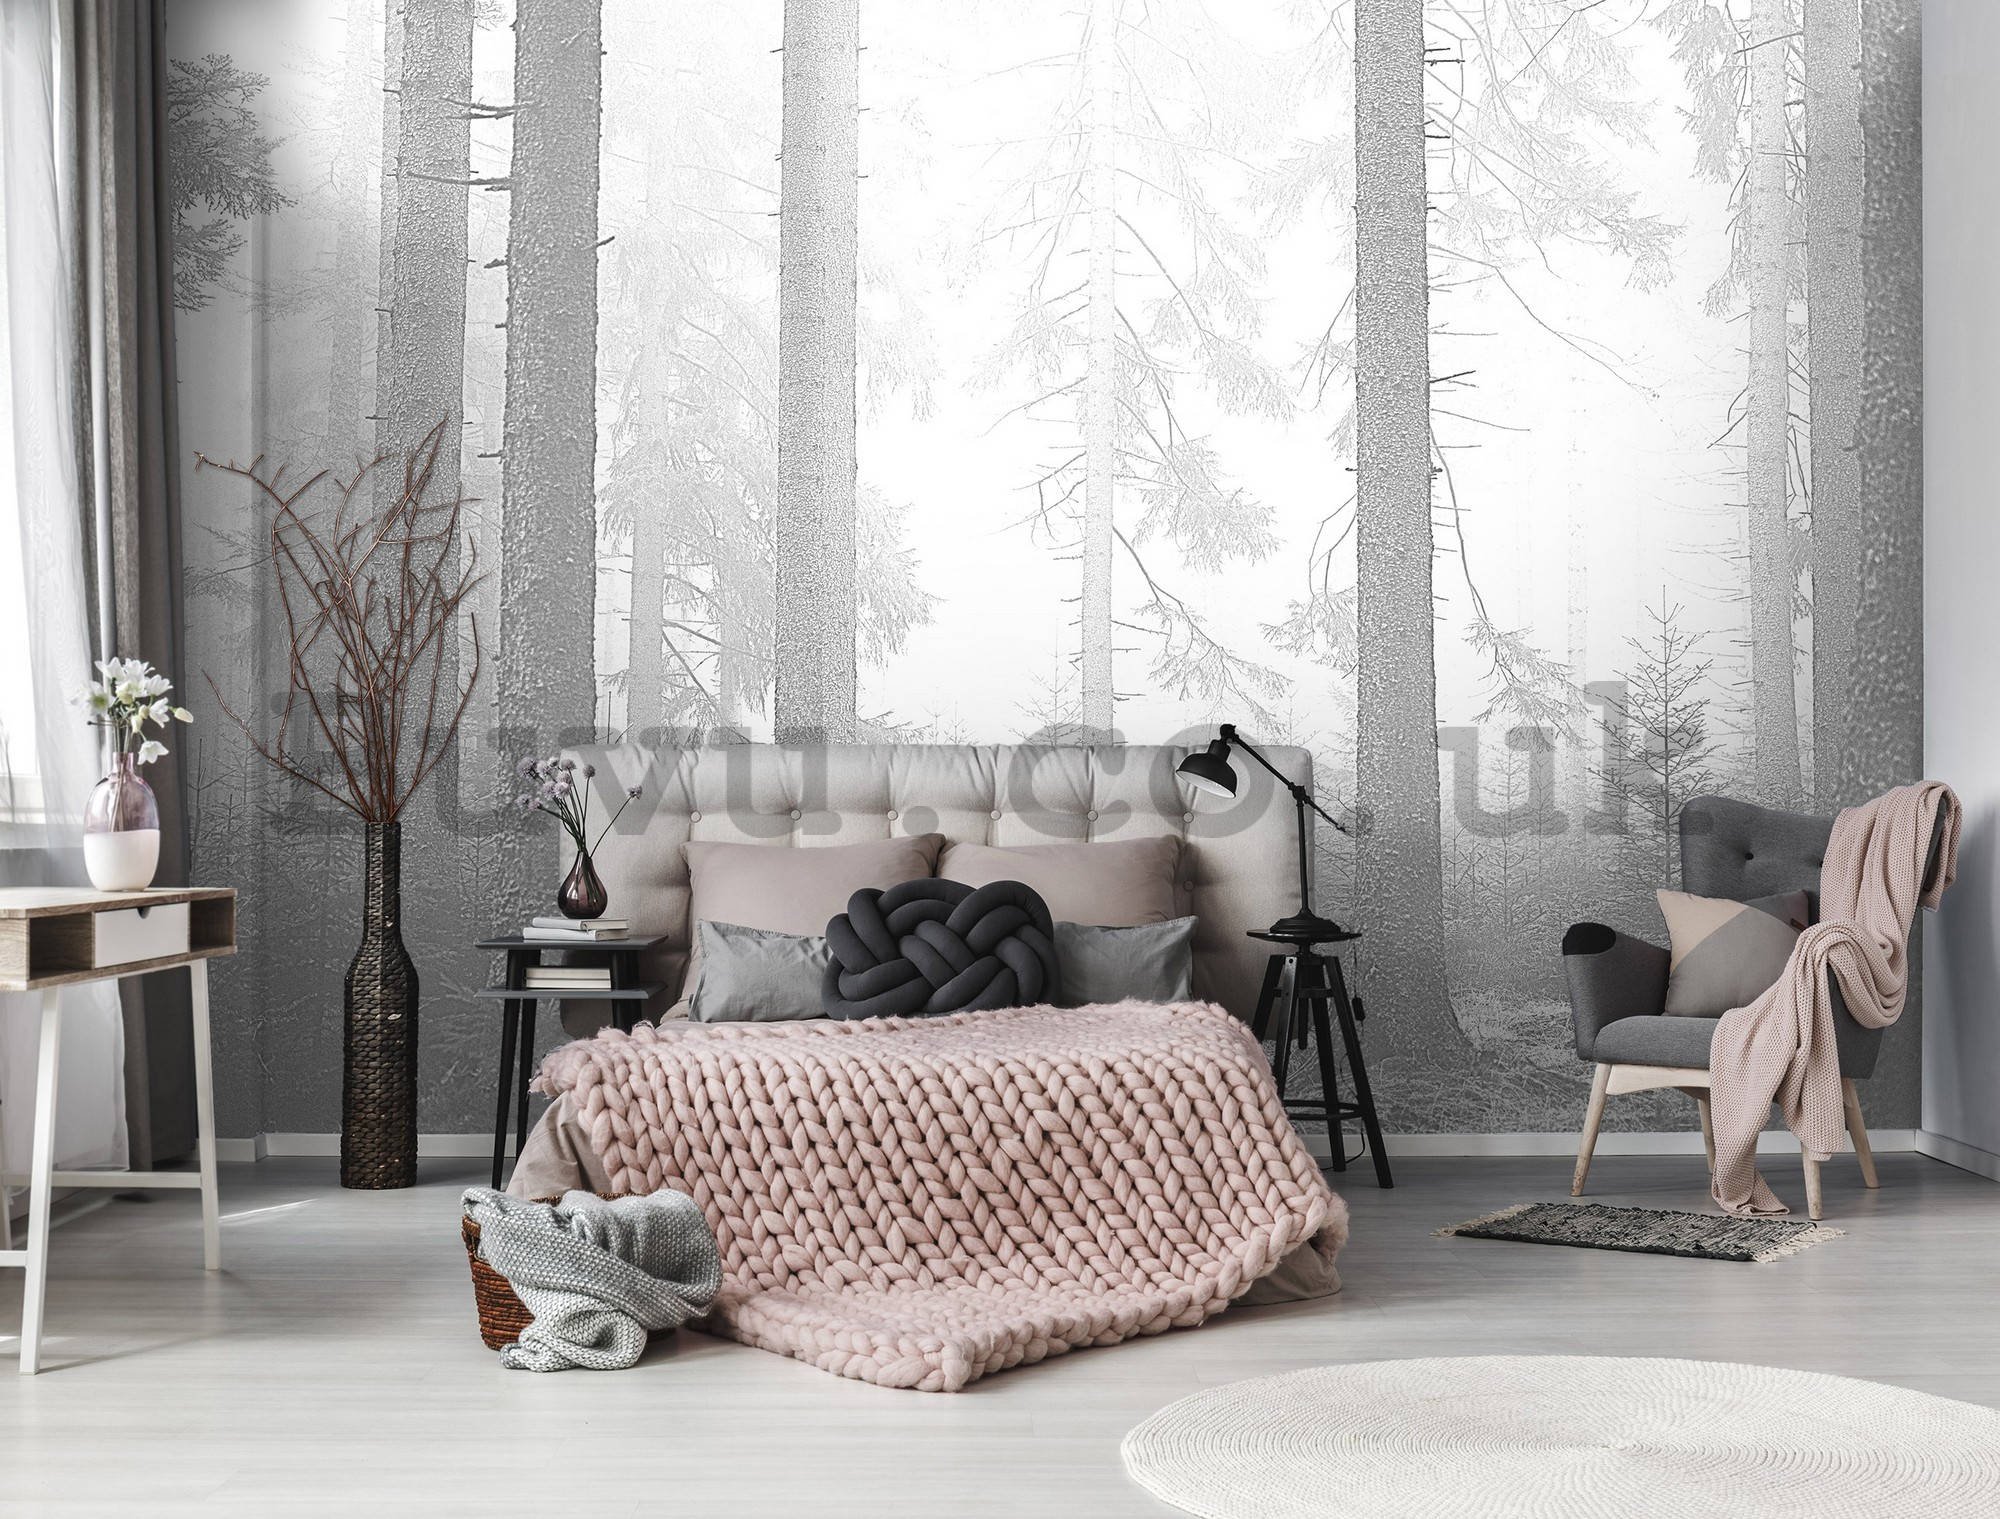 Wall mural vlies: Black and white forest (3) - 416x254 cm